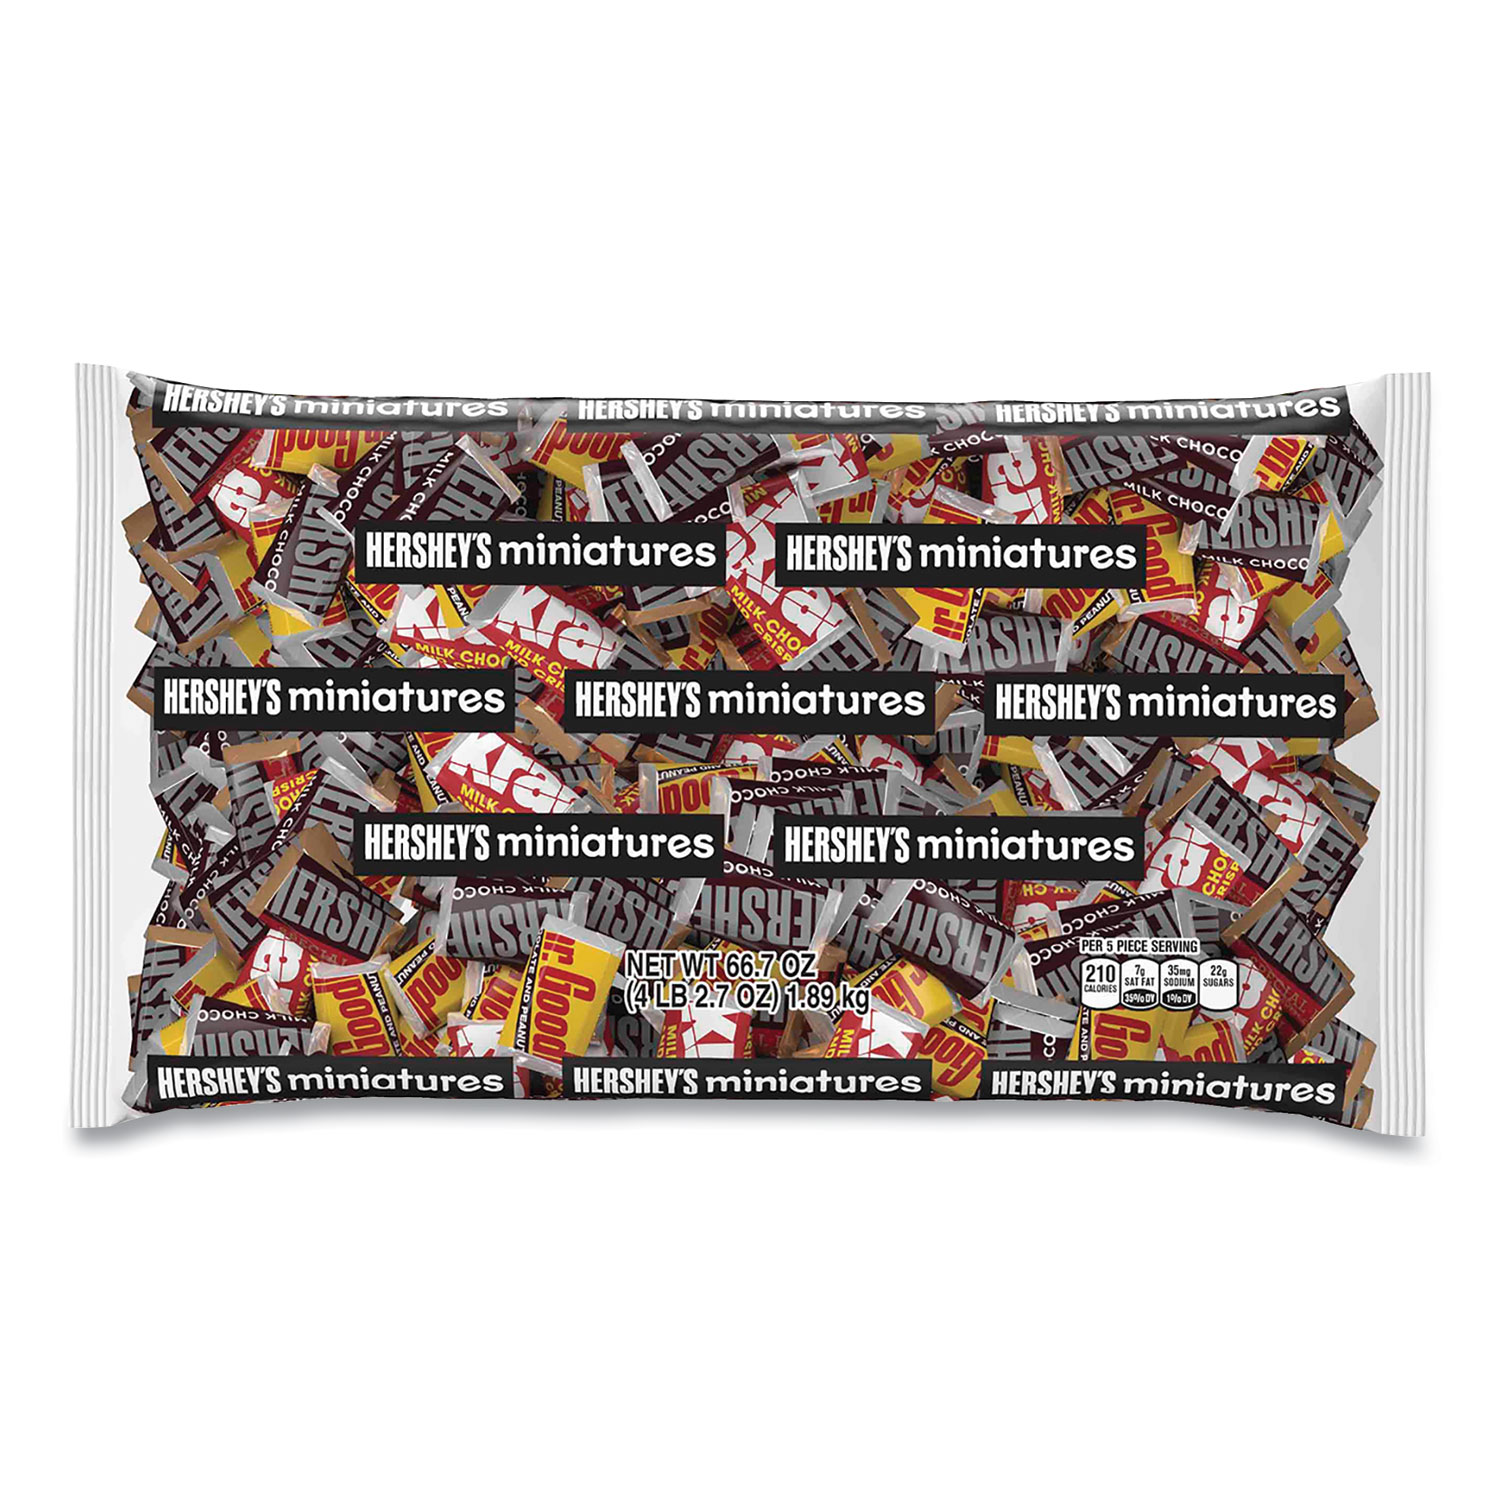  Hershey's 21001 Miniatures Variety Bulk Pack, Assorted Chocolates, 66.7 oz Bag, Free Delivery in 1-4 Business Days (GRR24600055) 